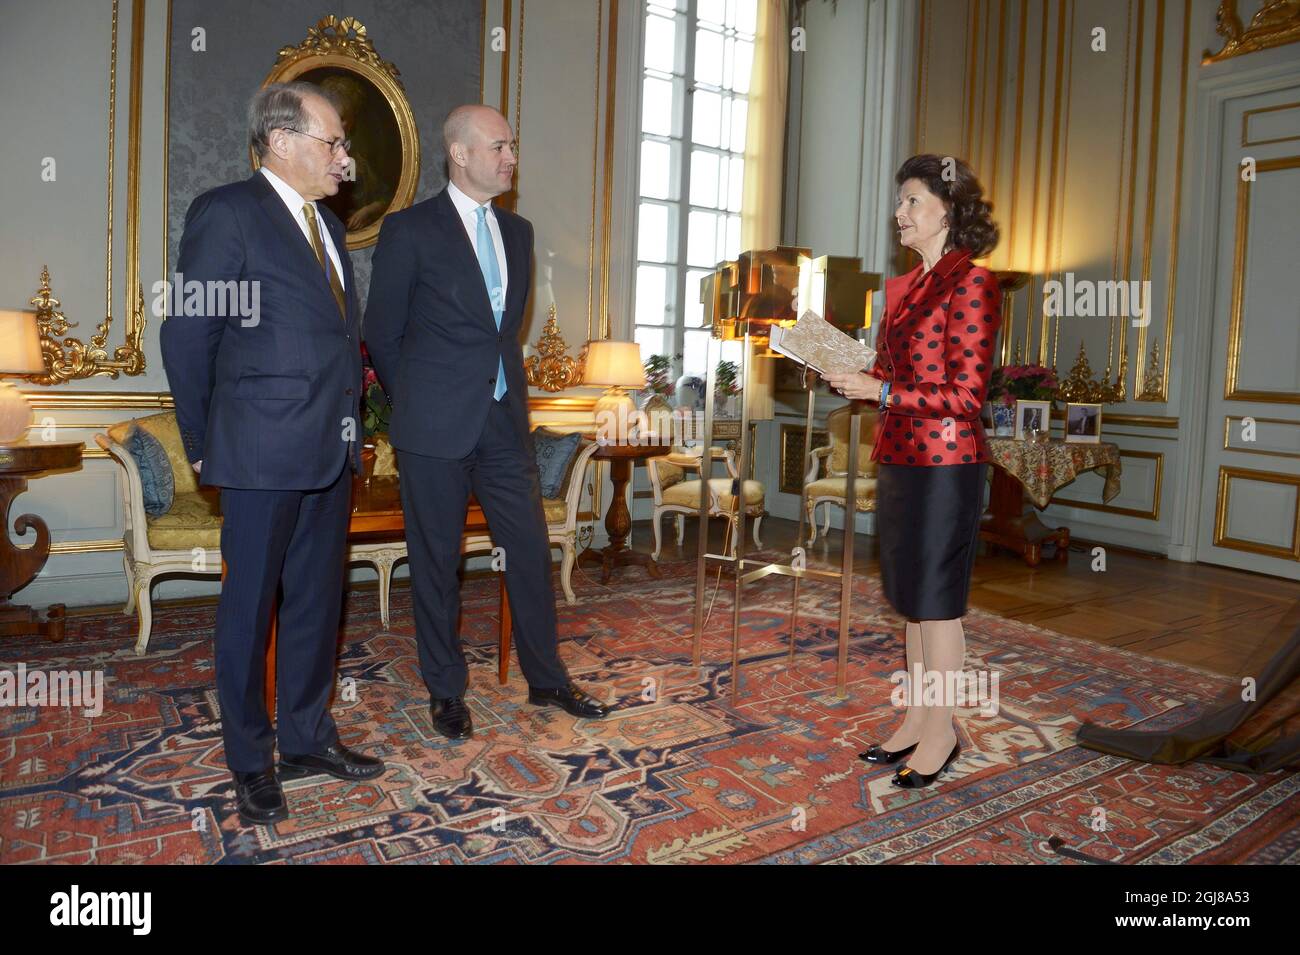 STOCKHOLM 2013-12-18 Queen Silvia together with the Speaker of the Parliament Per Westerberg and Prime Minister Fredrik Reinfeldt standing next to her gift, a brass lamp from Skultuna, given to her by the Parliament and Government of Sweden during a reception in connection with H.M. The Queen's 70th birthday at the Royal Palace in Stockholm, Sweden, December 18, 2013. Foto: Janerik Henriksson / TT / Kod 10010 Stock Photo